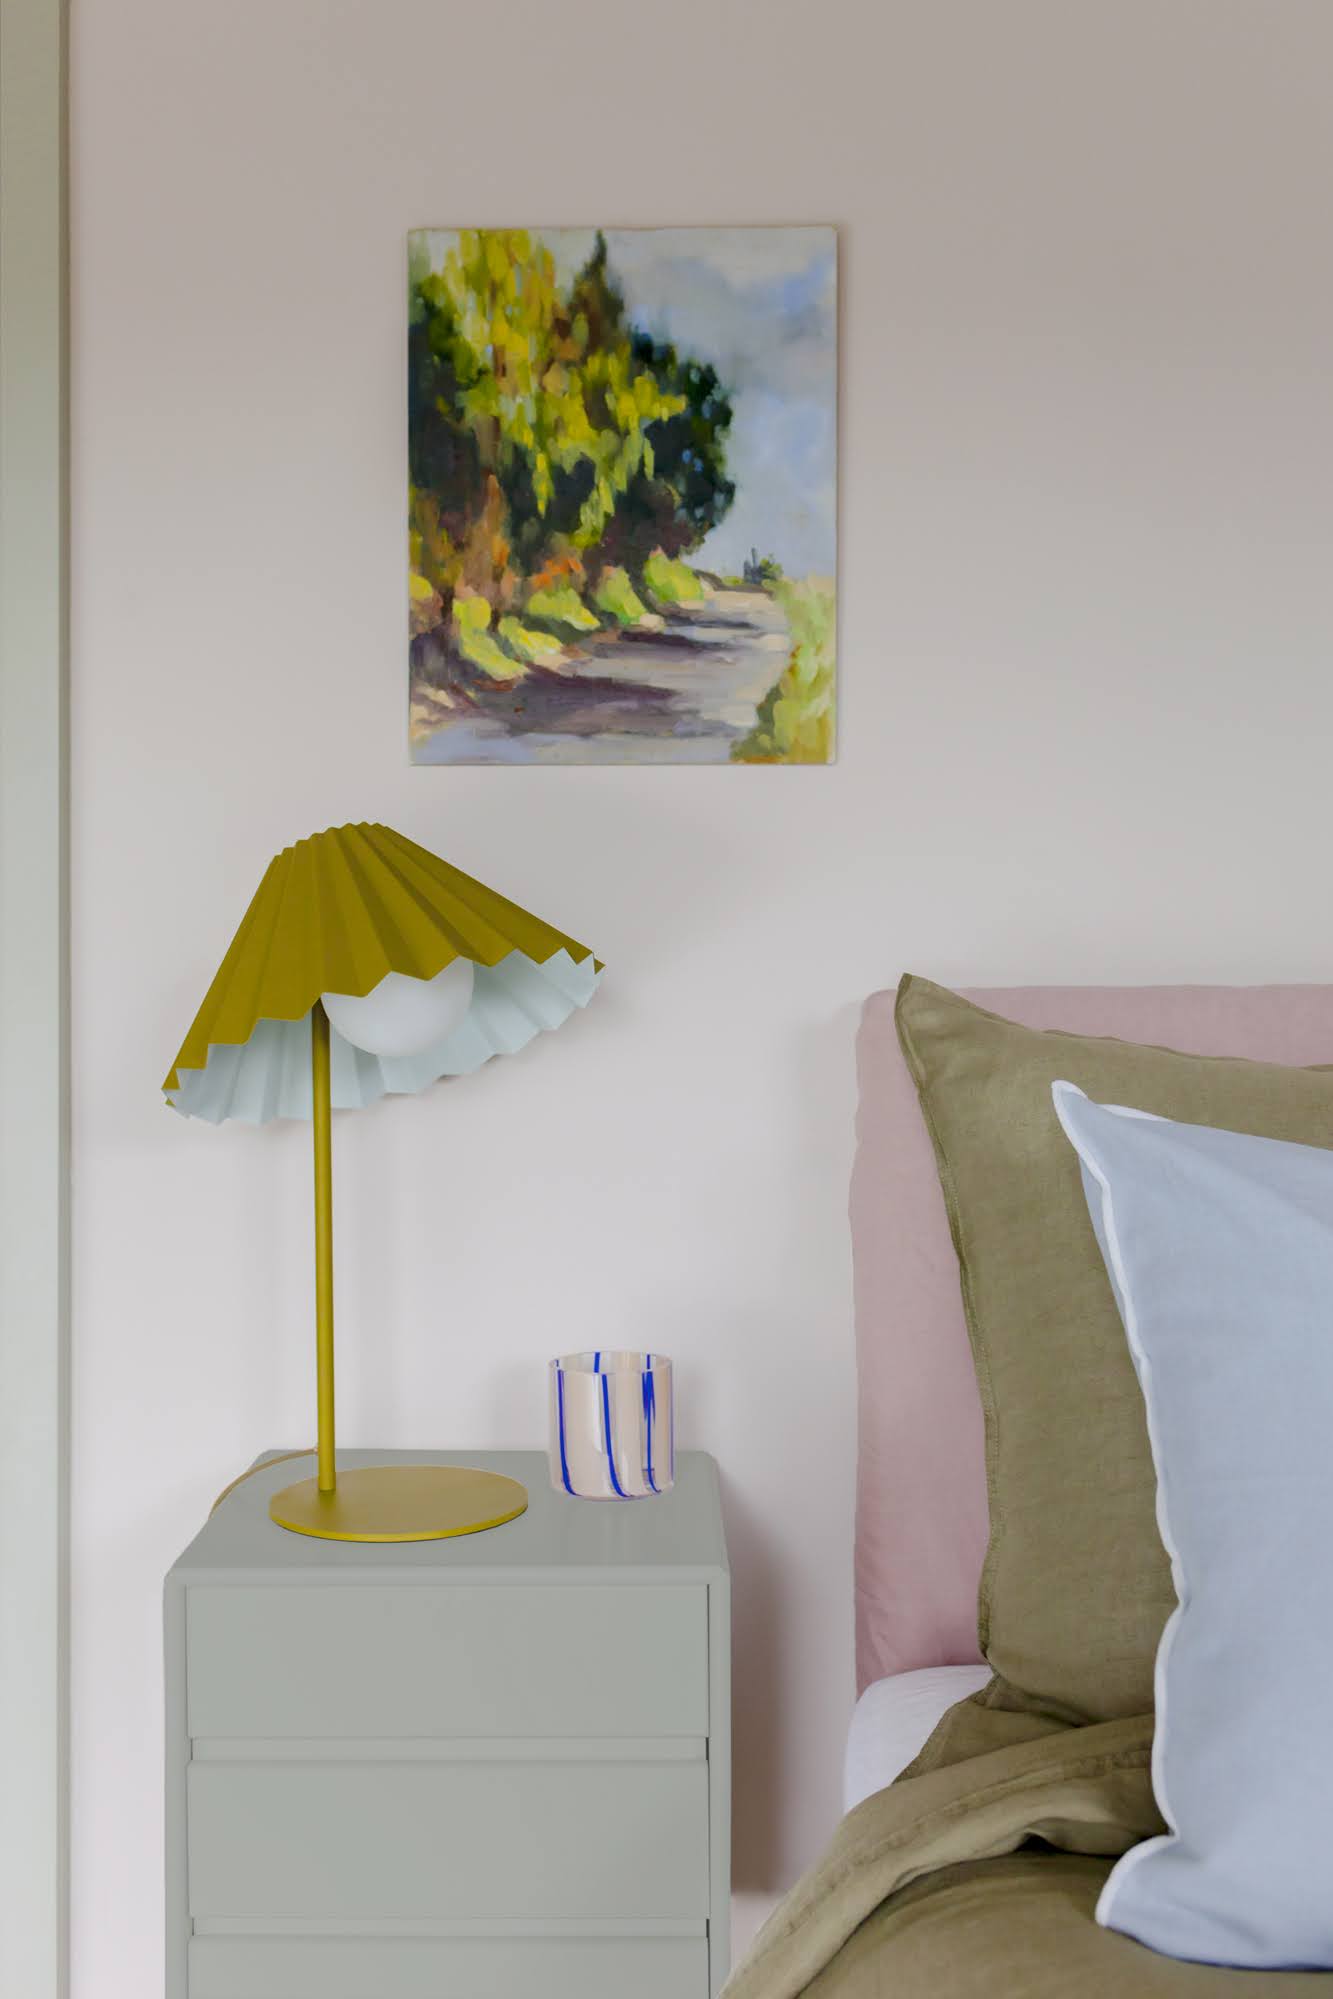 The Pleat Table lamp, in bedroom setting